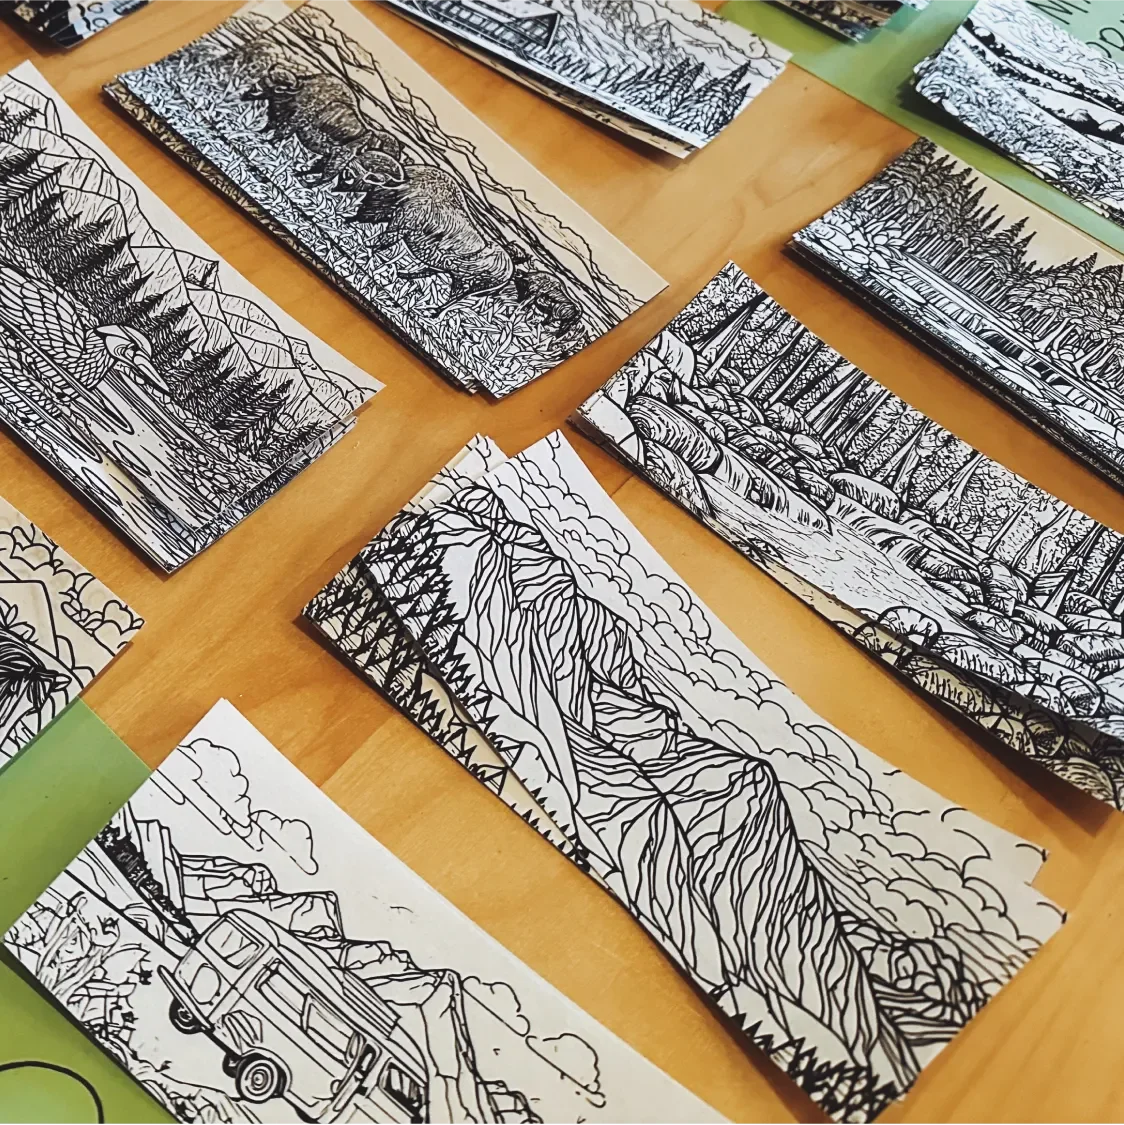 Coloring book pages featuring outdoor landscapes